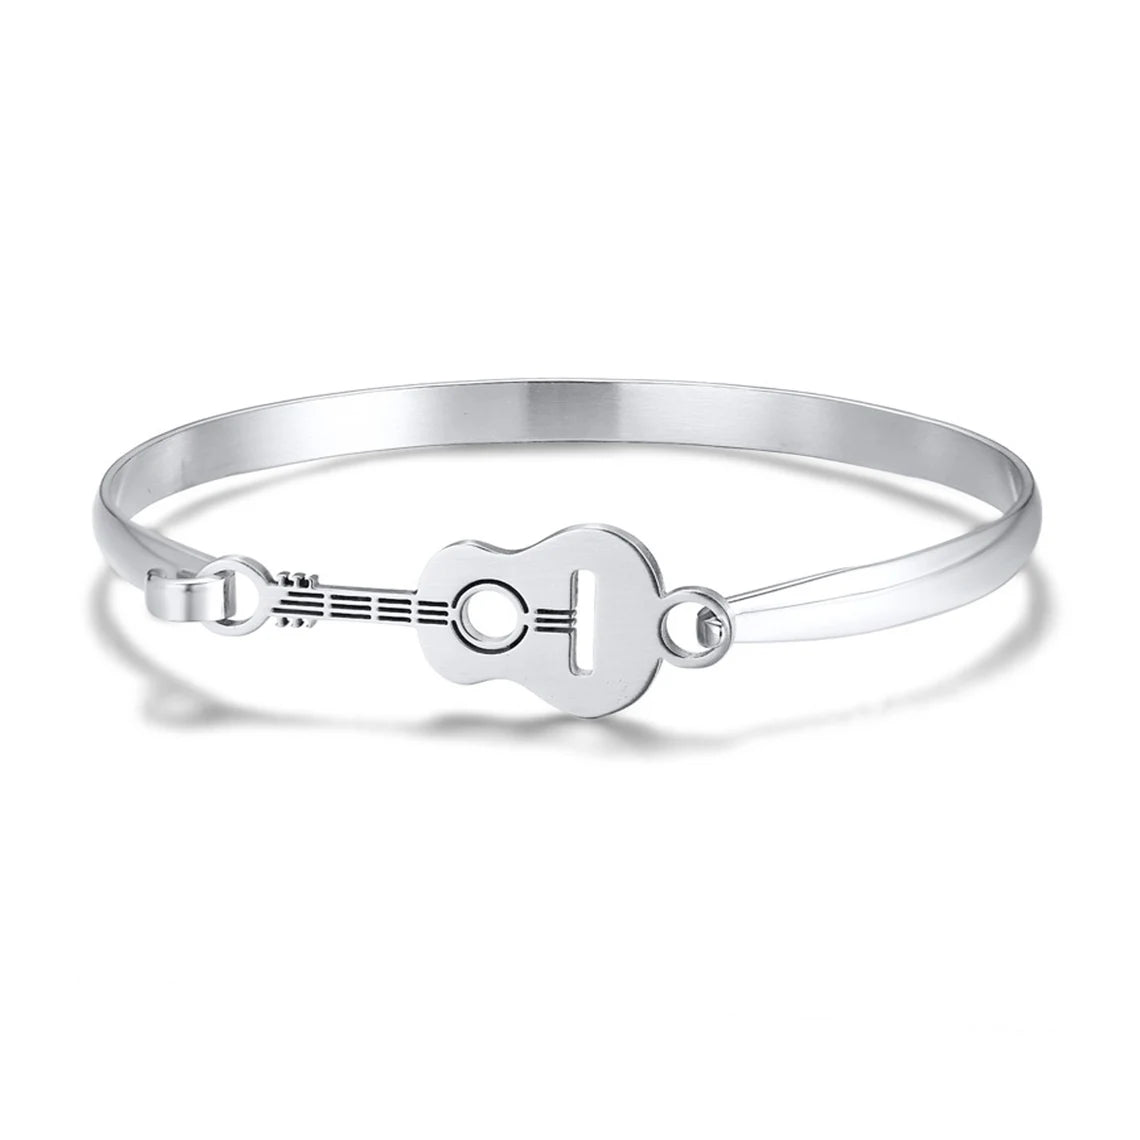 Thin Guitar Bracelet with Engraved Initials